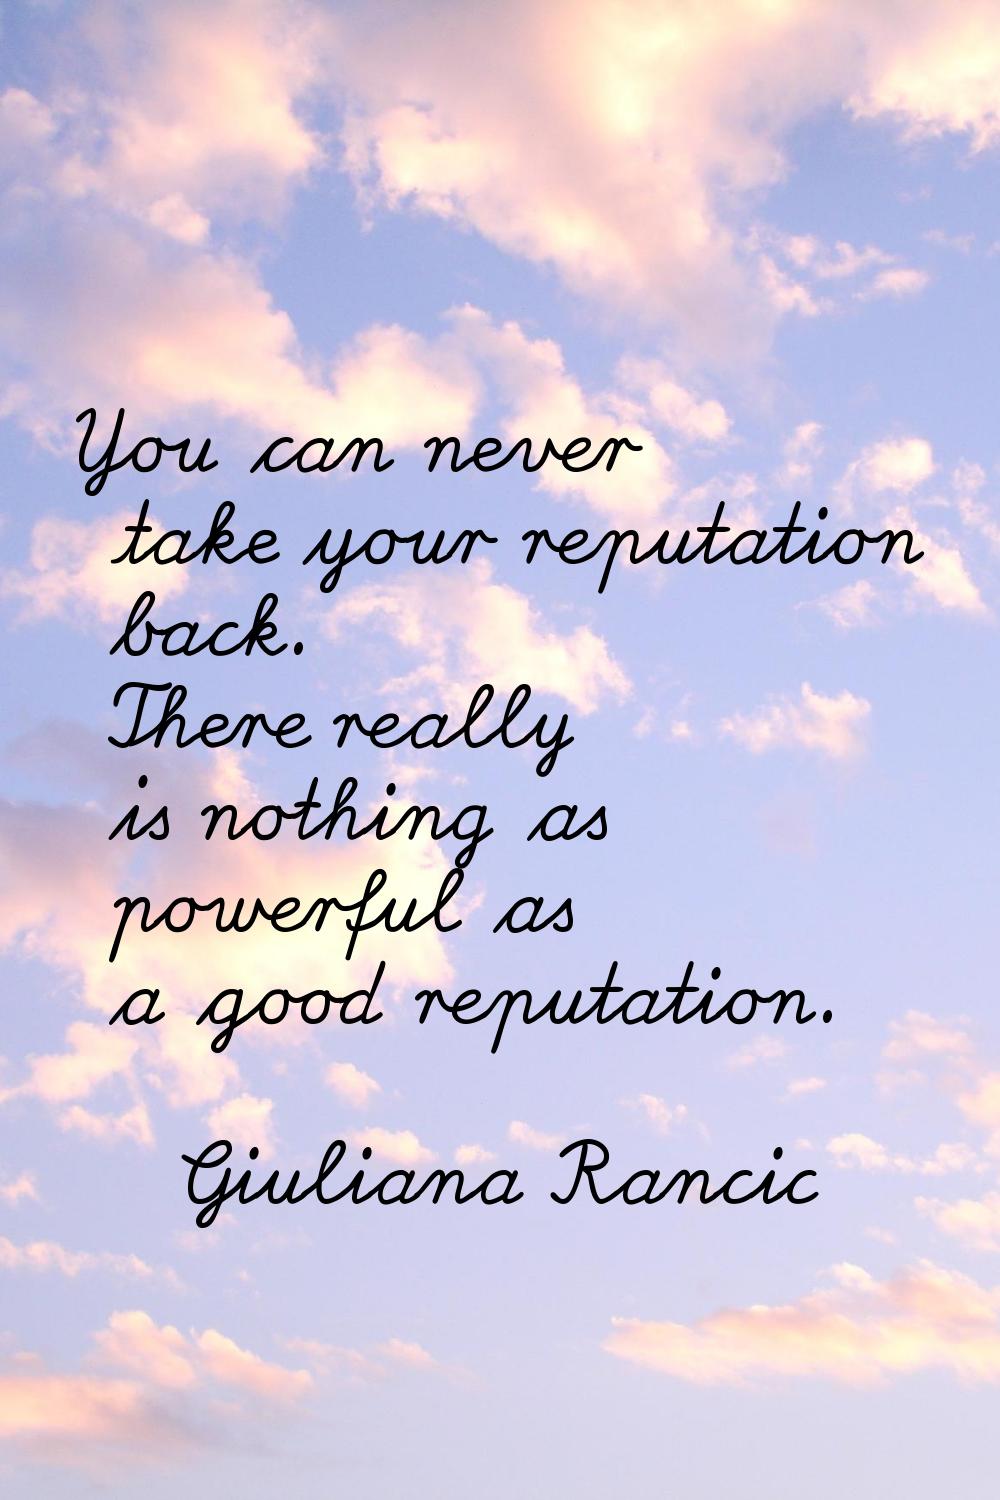 You can never take your reputation back. There really is nothing as powerful as a good reputation.